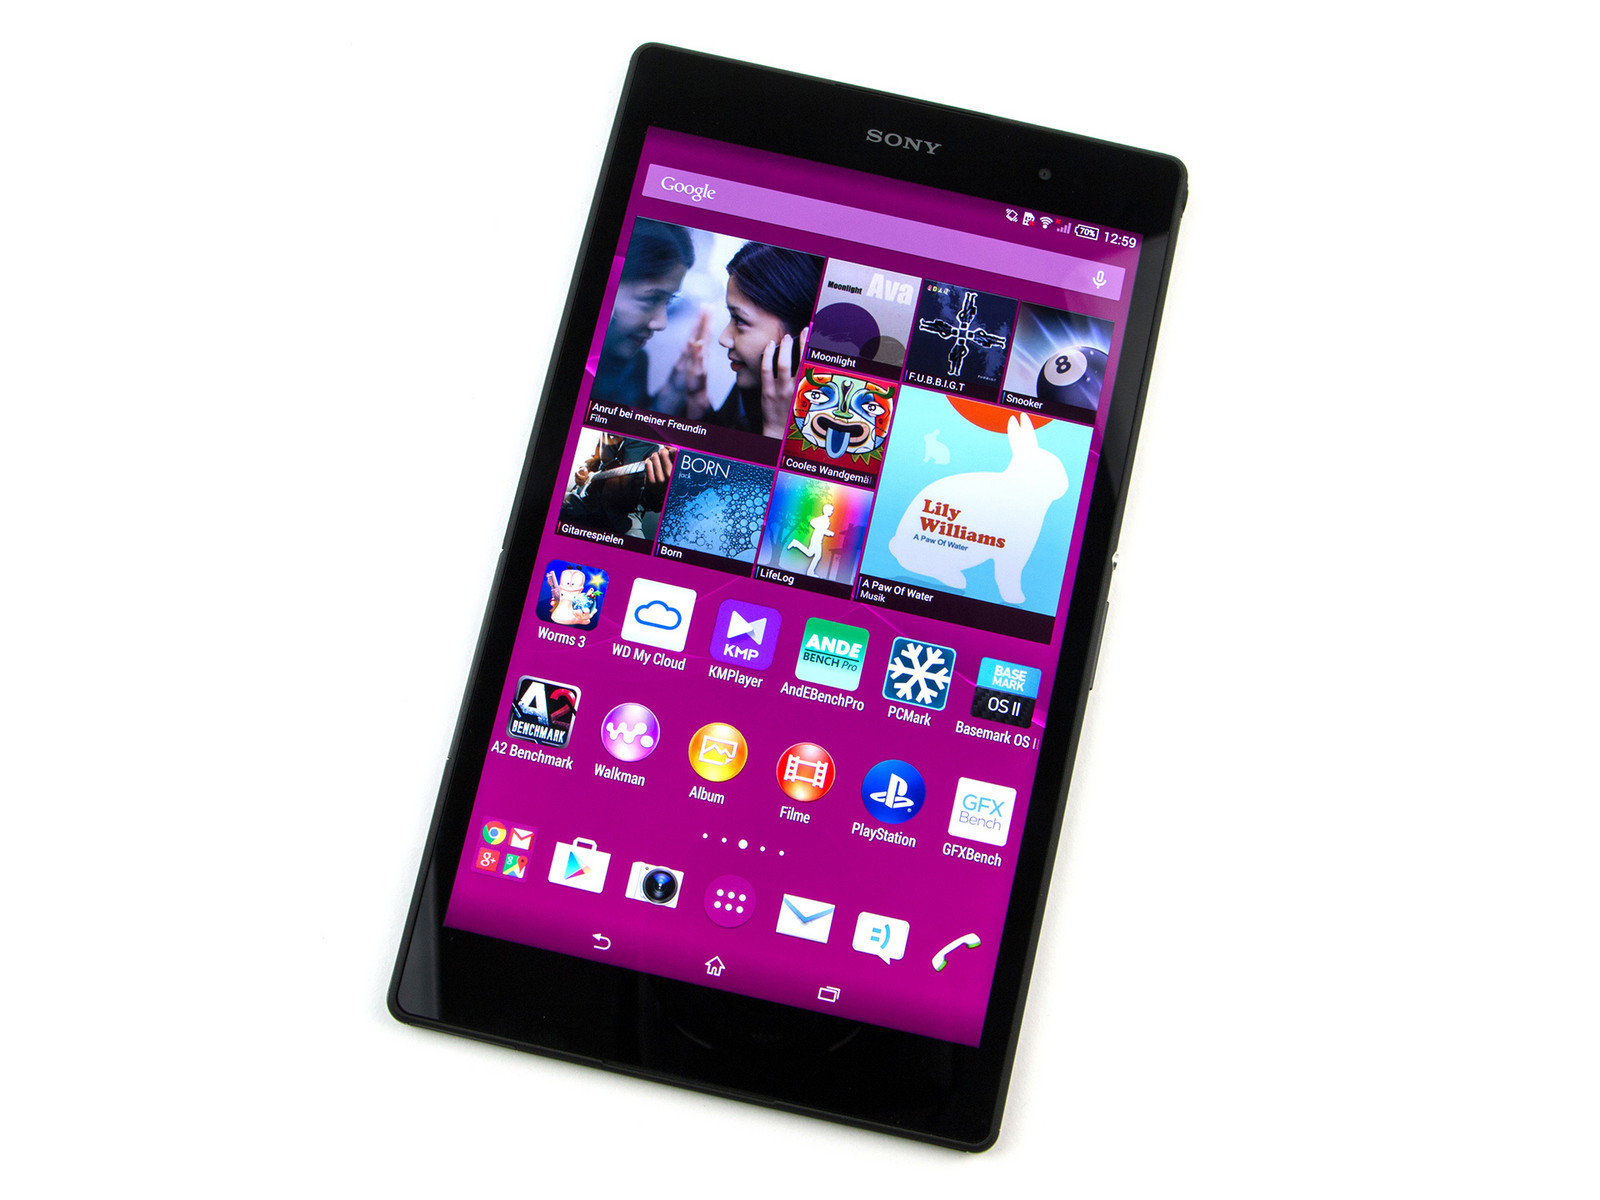 Sony Xperia Tablet Compact - Notebookcheck.net External Reviews